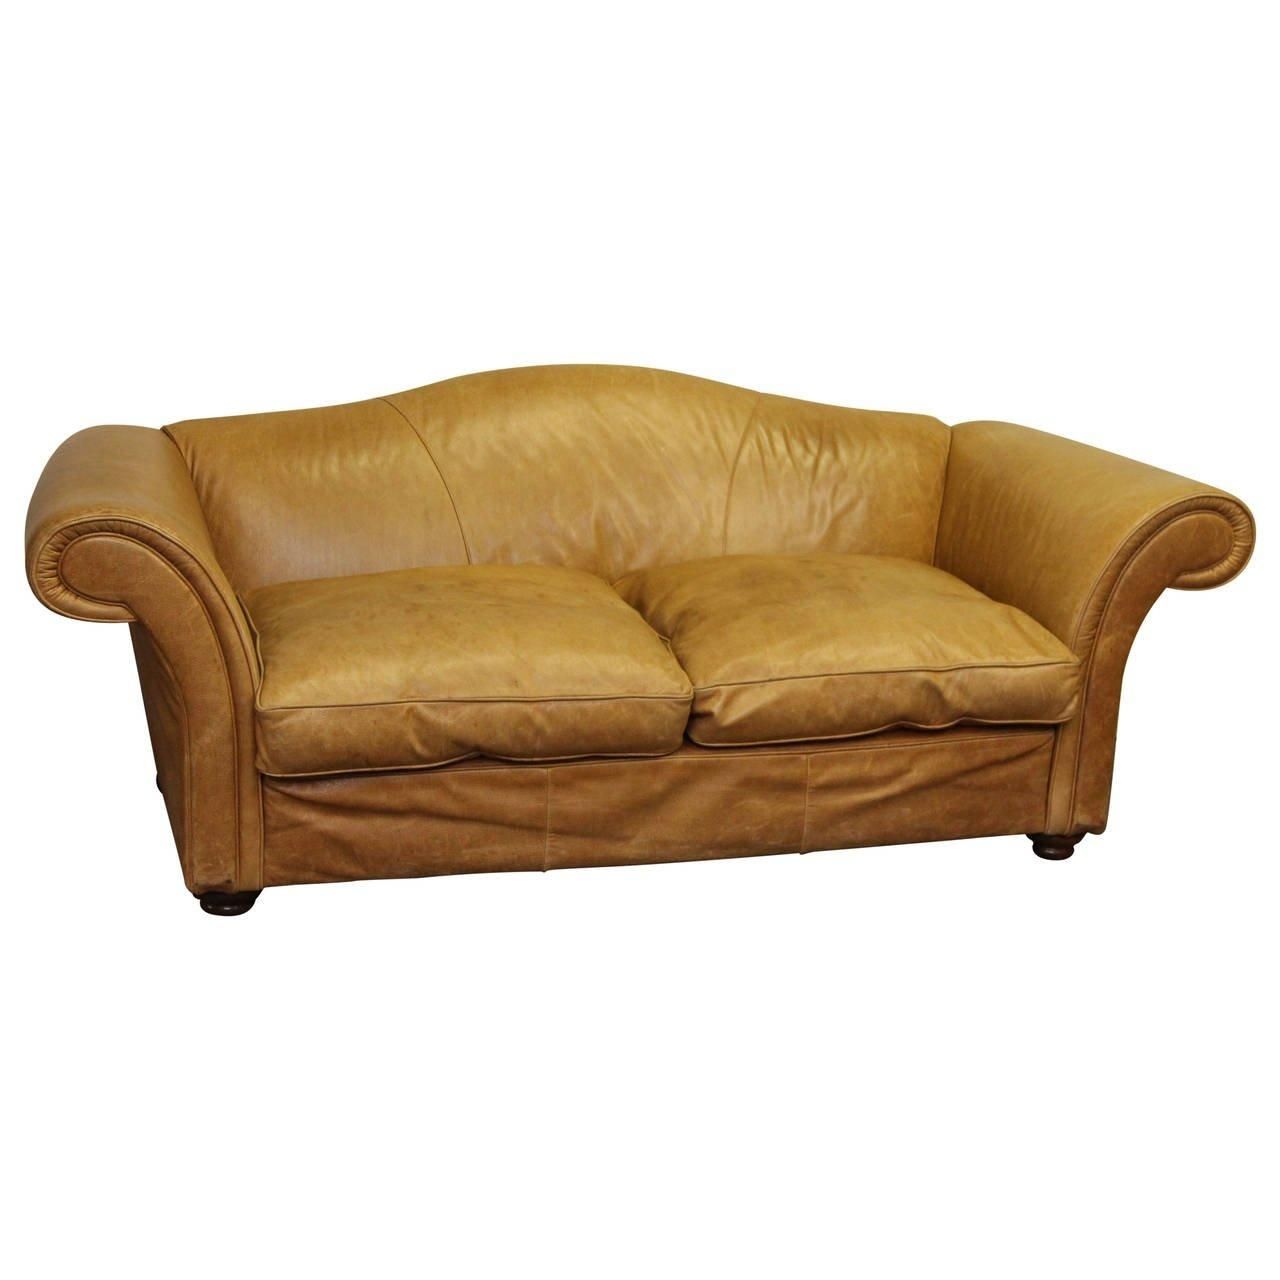 1950s Oversized French Leather Sofa With Down Filled Cushions For Inside Sofa Cushions (View 11 of 21)